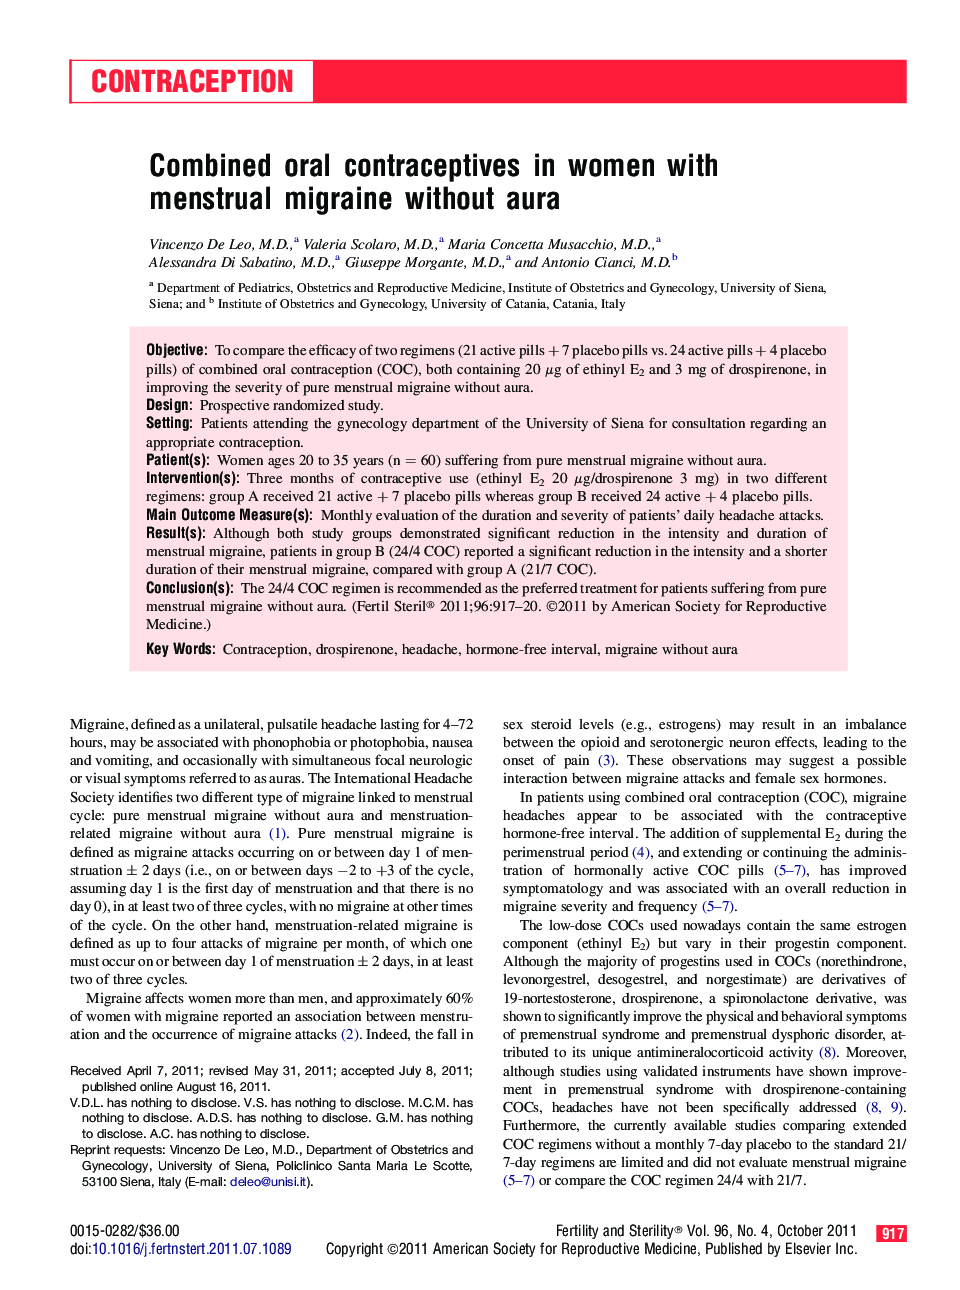 Combined oral contraceptives in women with menstrual migraine without aura 